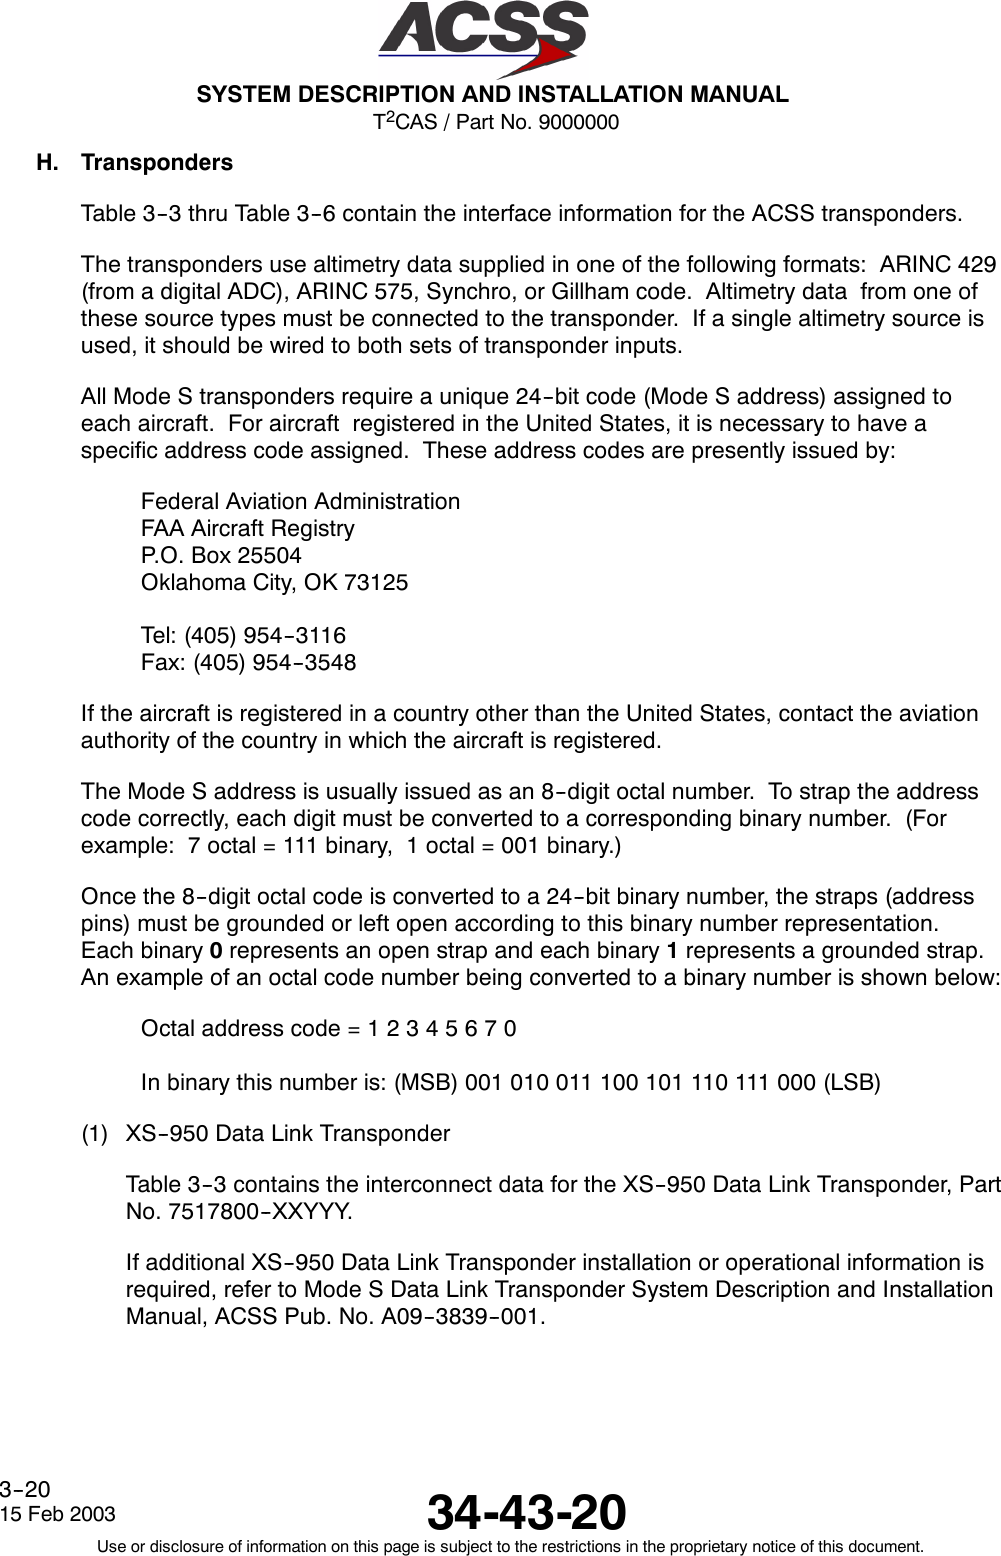 T2CAS / Part No. 9000000SYSTEM DESCRIPTION AND INSTALLATION MANUAL34-43-2015 Feb 2003Use or disclosure of information on this page is subject to the restrictions in the proprietary notice of this document.3--20H. TranspondersTable 3--3 thru Table 3--6 contain the interface information for the ACSS transponders.The transponders use altimetry data supplied in one of the following formats: ARINC 429(from a digital ADC), ARINC 575, Synchro, or Gillham code. Altimetry data from one ofthese source types must be connected to the transponder. If a single altimetry source isused, it should be wired to both sets of transponder inputs.All Mode S transponders require a unique 24--bit code (Mode S address) assigned toeach aircraft. For aircraft registered in the United States, it is necessary to have aspecific address code assigned. These address codes are presently issued by:Federal Aviation AdministrationFAA Aircraft RegistryP.O. Box 25504Oklahoma City, OK 73125Tel: (405) 954--3116Fax: (405) 954--3548If the aircraft is registered in a country other than the United States, contact the aviationauthority of the country in which the aircraft is registered.The Mode S address is usually issued as an 8--digit octal number. To strap the addresscode correctly, each digit must be converted to a corresponding binary number. (Forexample: 7 octal = 111 binary, 1 octal = 001 binary.)Once the 8--digit octal code is converted to a 24--bit binary number, the straps (addresspins) must be grounded or left open according to this binary number representation.Each binary 0represents an open strap and each binary 1represents a grounded strap.An example of an octal code number being converted to a binary number is shown below:Octal address code = 12345670In binary this number is: (MSB) 001 010 011 100 101 110 111 000 (LSB)(1) XS--950 Data Link TransponderTable 3--3 contains the interconnect data for the XS--950 Data Link Transponder, PartNo. 7517800--XXYYY.If additional XS--950 Data Link Transponder installation or operational information isrequired, refer to Mode S Data Link Transponder System Description and InstallationManual, ACSS Pub. No. A09--3839--001.